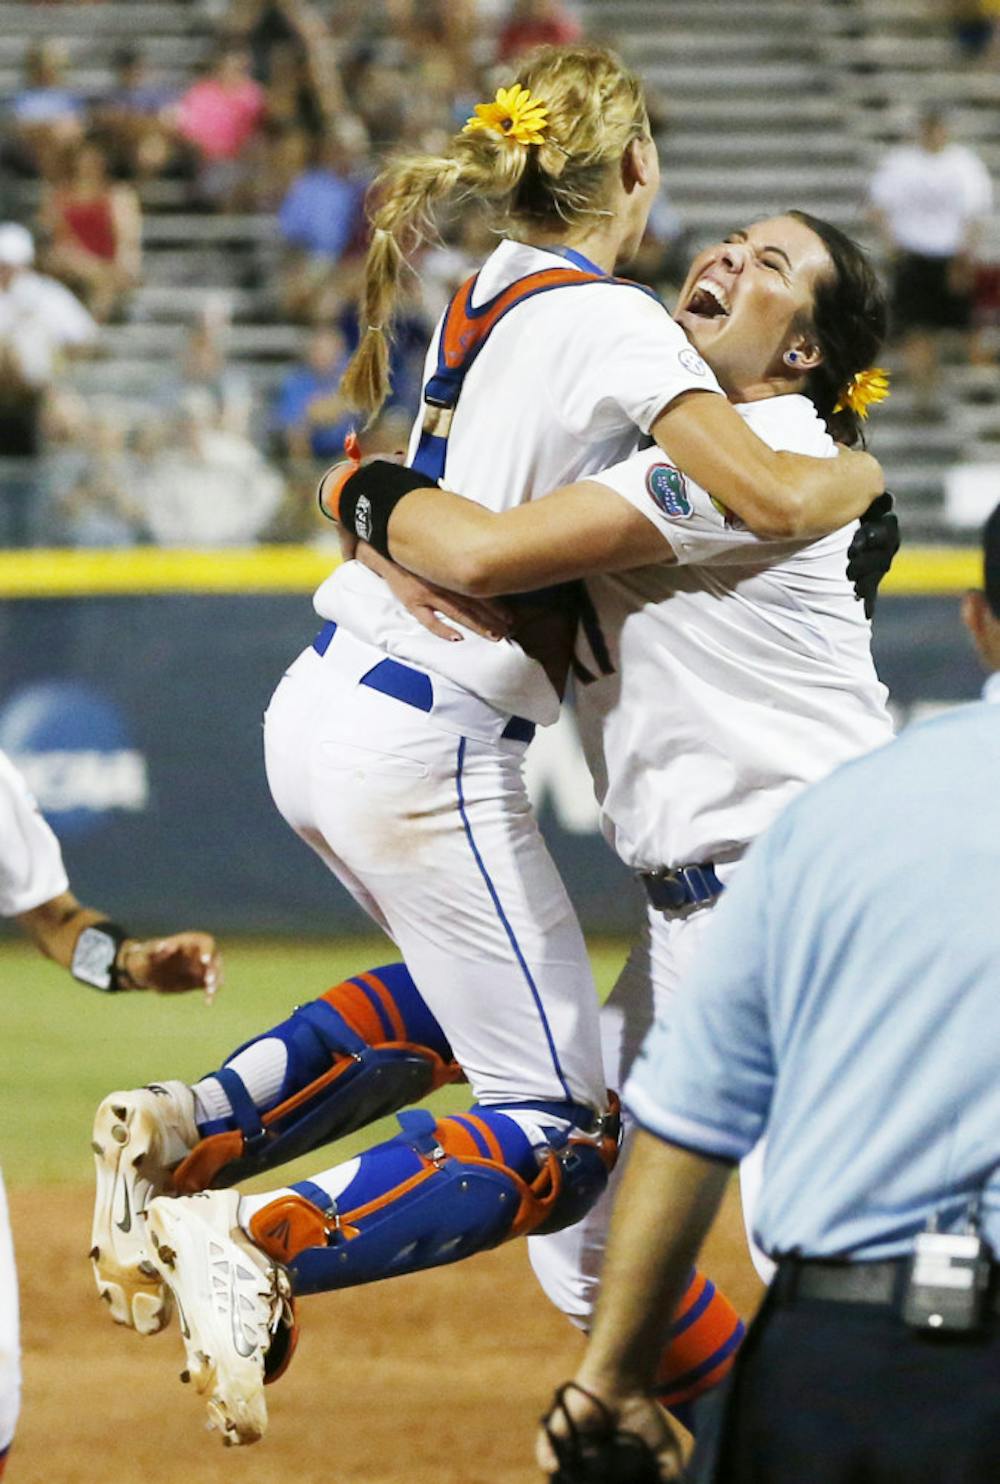 <p>Florida pitcher Lauren Haeger, right, celebrates with catcher Aubree Munro at the end of the final game against Michigan in the NCAA softball Women's College World Series, Wednesday, June 3, 2015, in Oklahoma City. Florida won 4-1.</p>